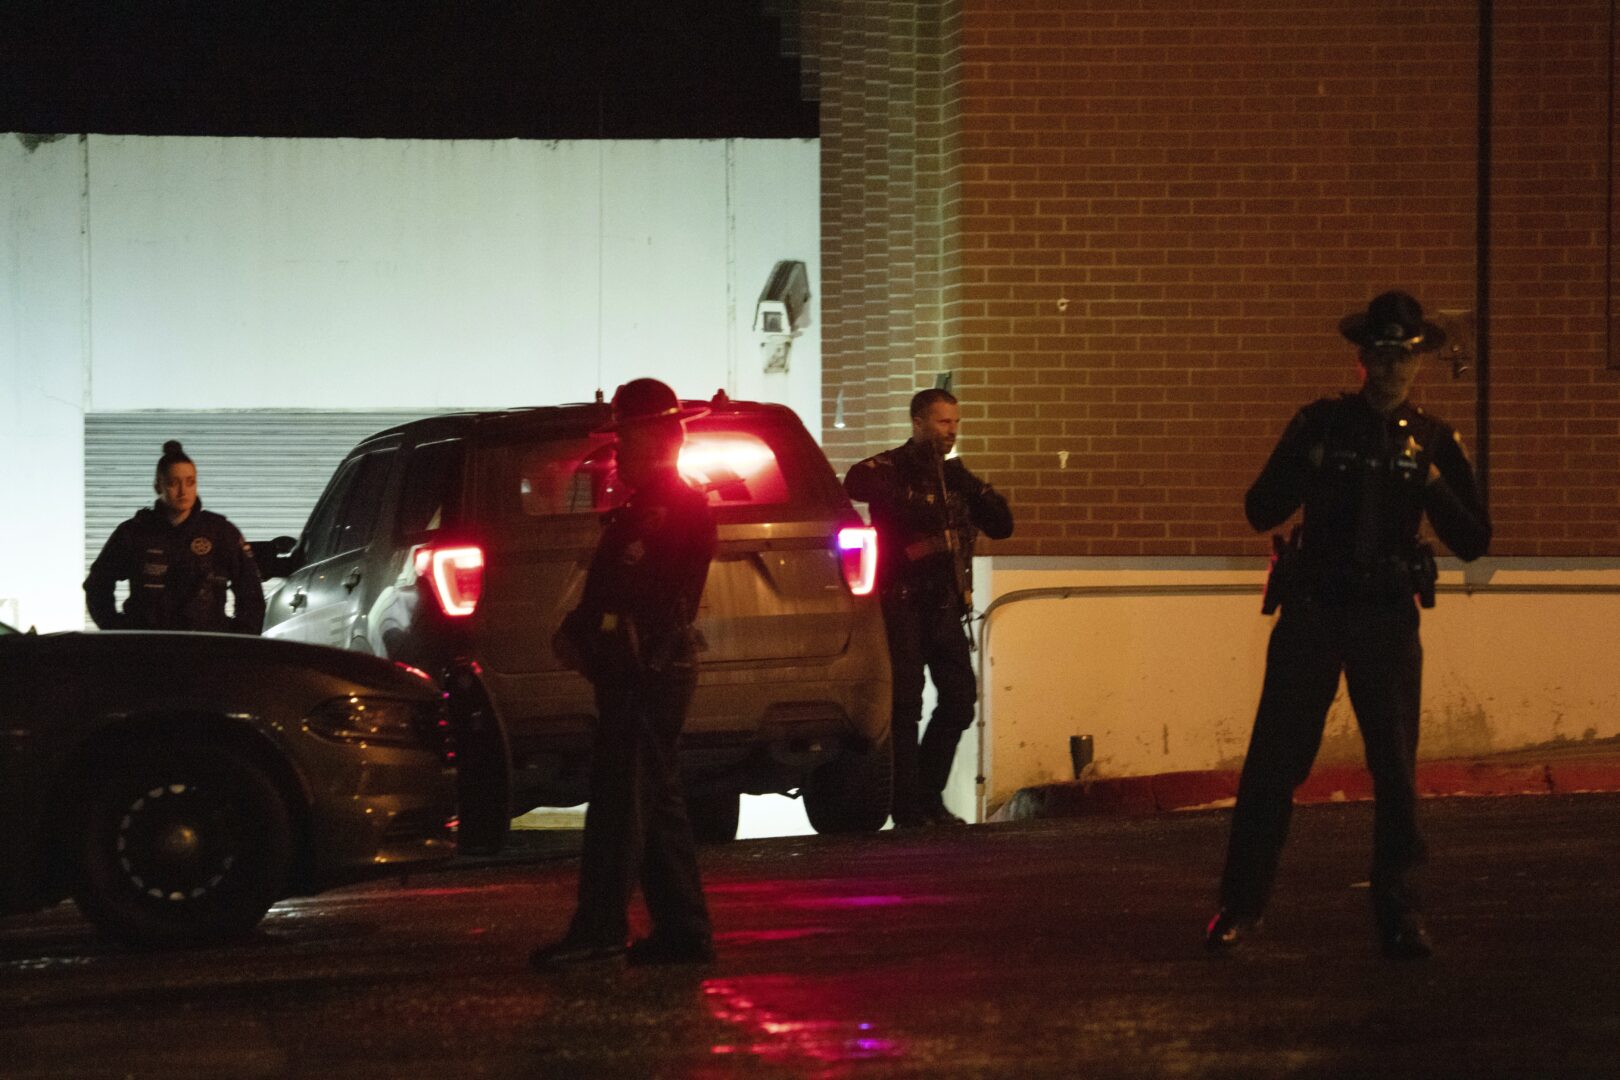 Law enforcement personnel stand guard next to a garage entrance at the Latah County Courthouse after Bryan Kohberger, who is accused of killing four University of Idaho students in November 2022, arrived in a police motorcade at the courthouse, Wednesday, Jan. 4, 2023, in Moscow, Idaho, following his extradition from Pennsylvania.